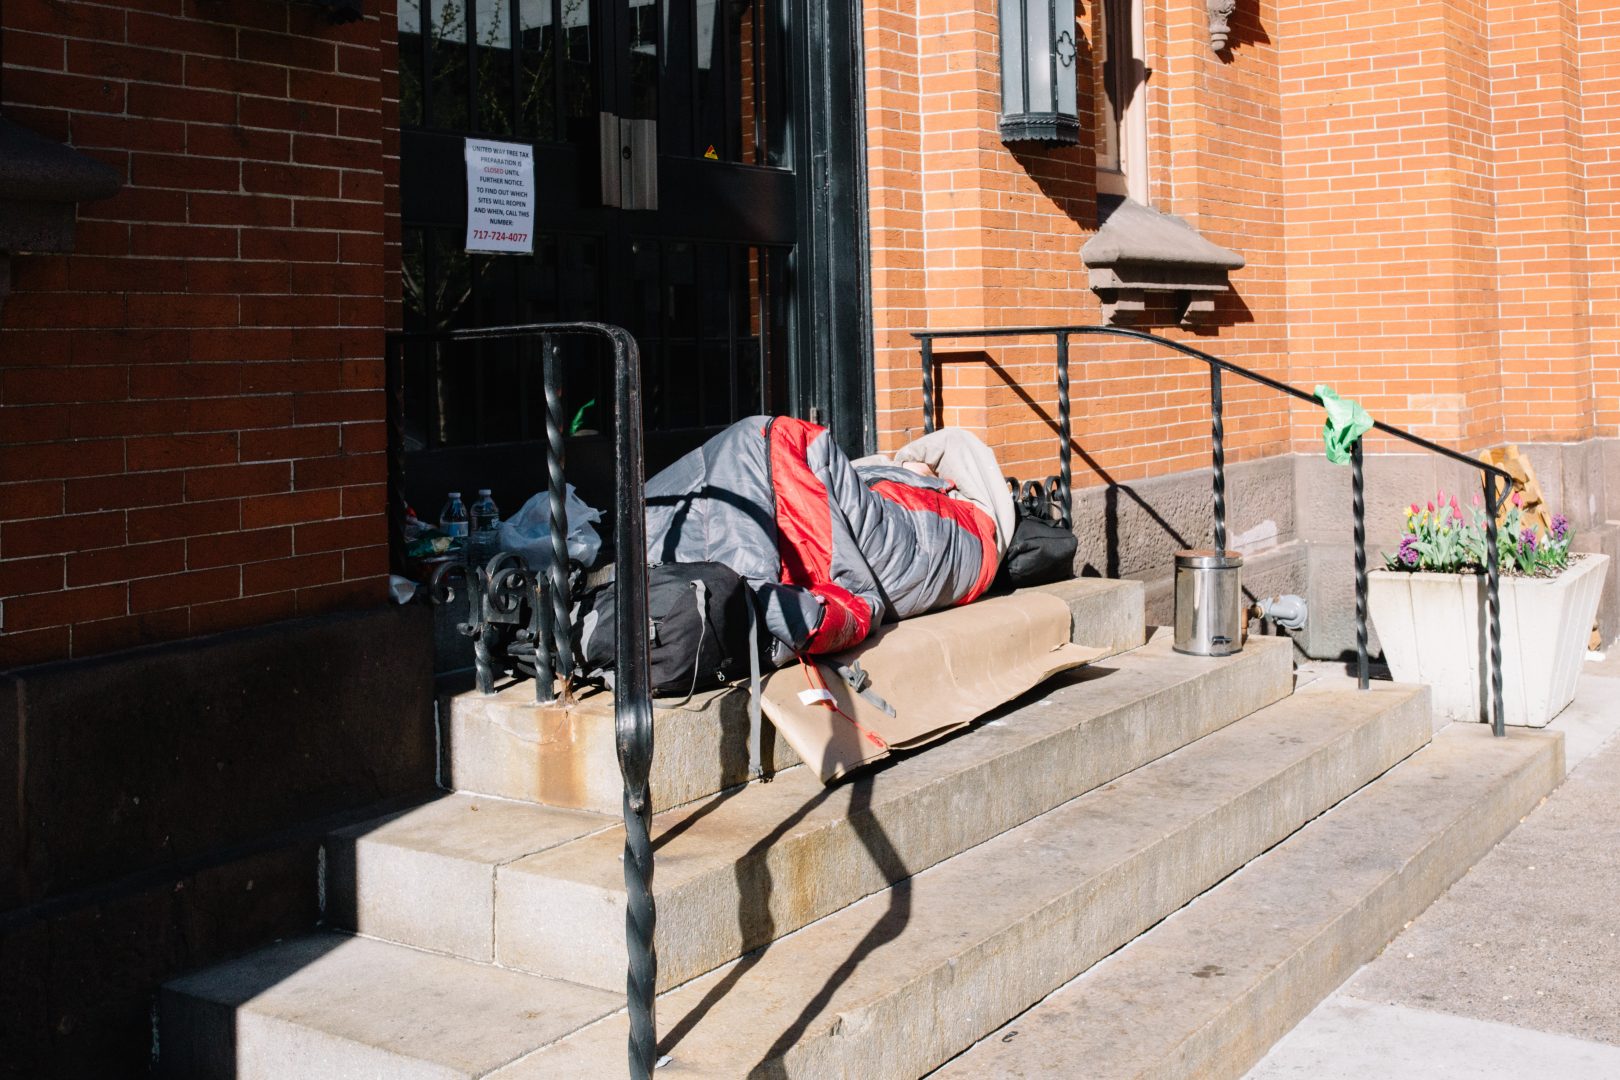 A homeless person lies in a sleeping bag outside the United Way in Harrisburg on April 10, 2020.